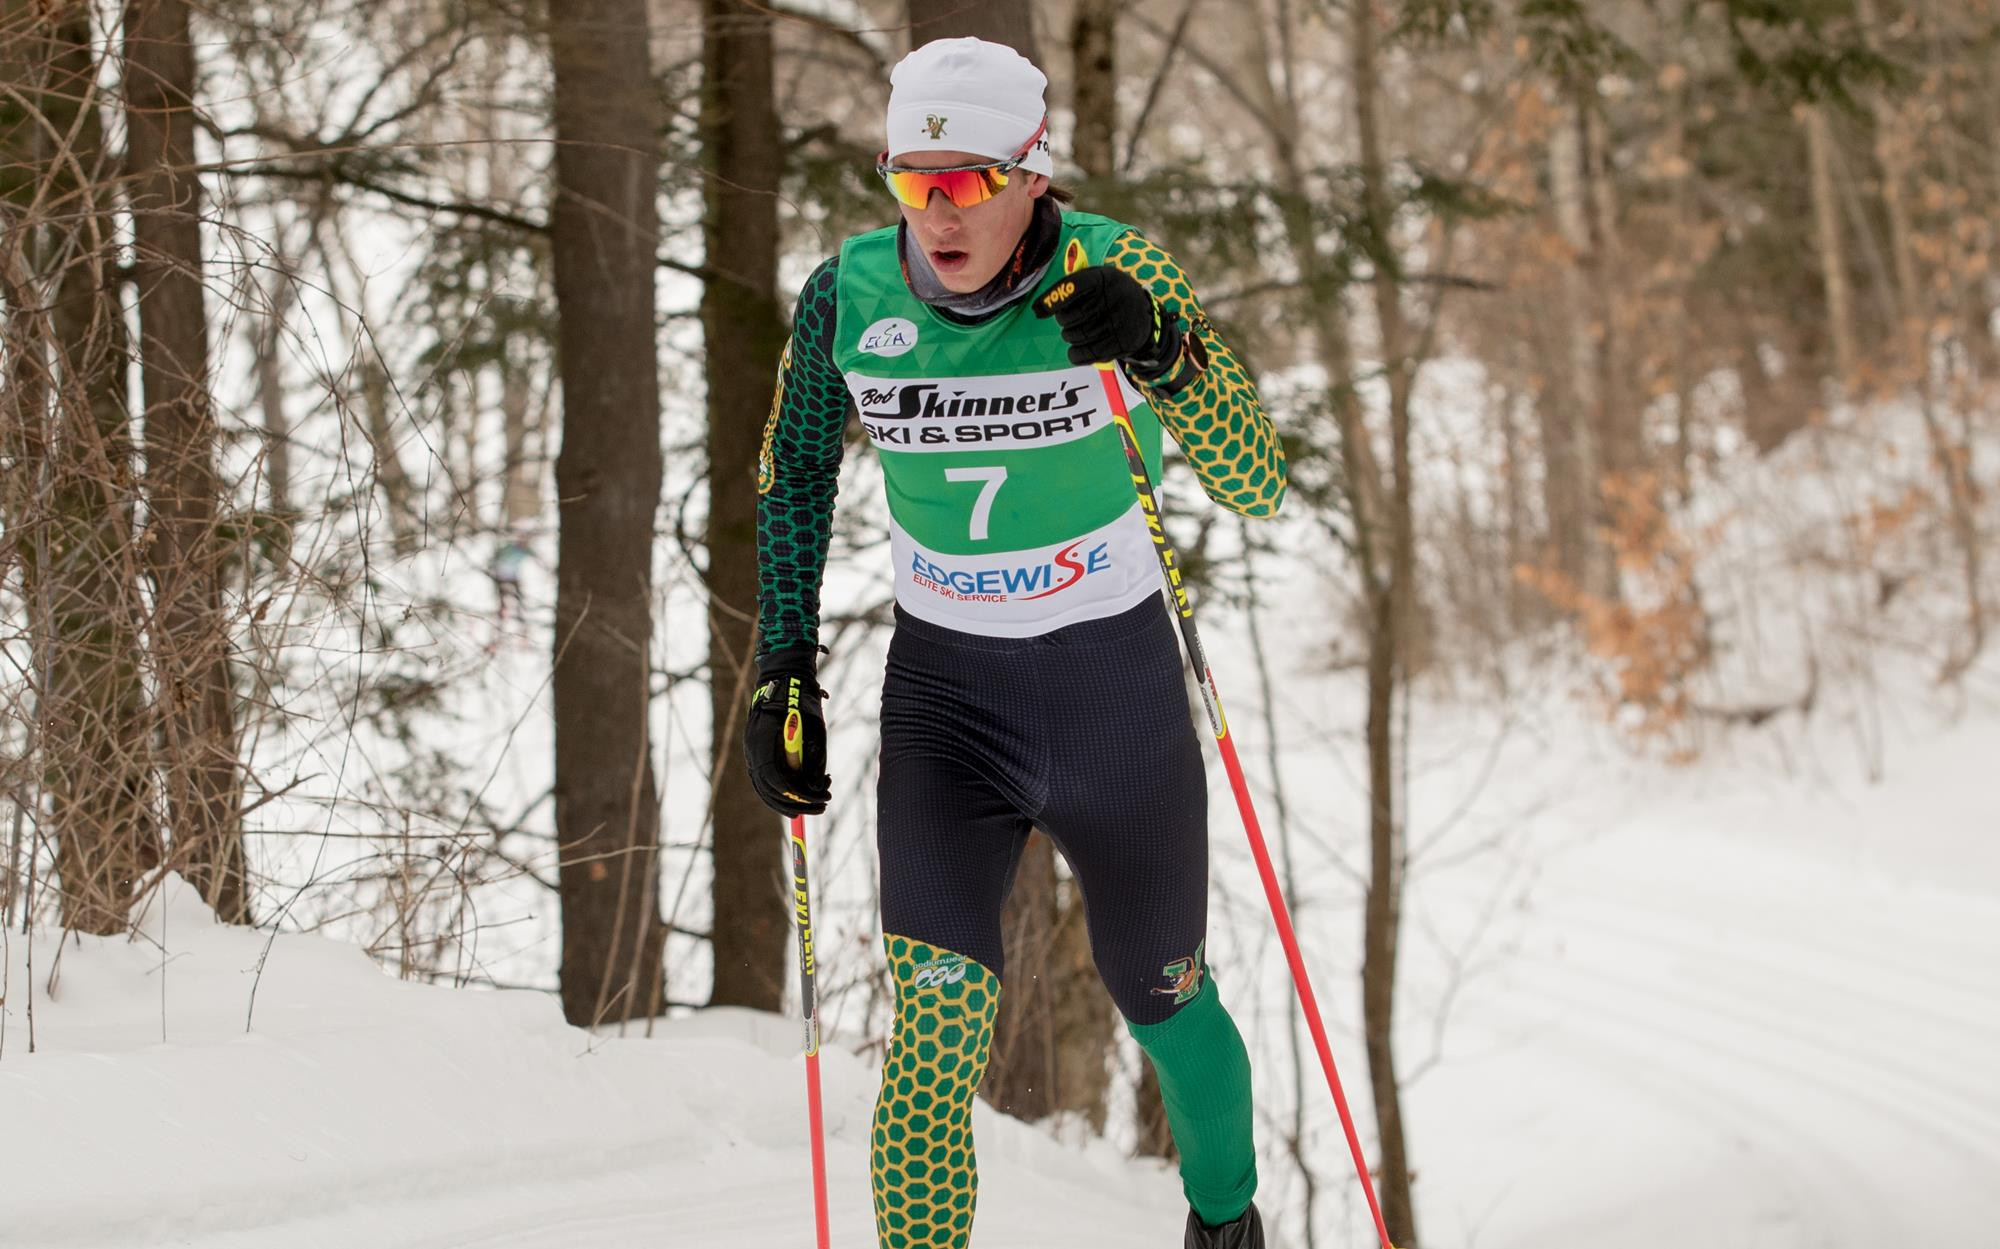 Bjorn Westervelt, who is part of the national team and represents University of Vermont praised the launch of the new competition ©University of Vermont 